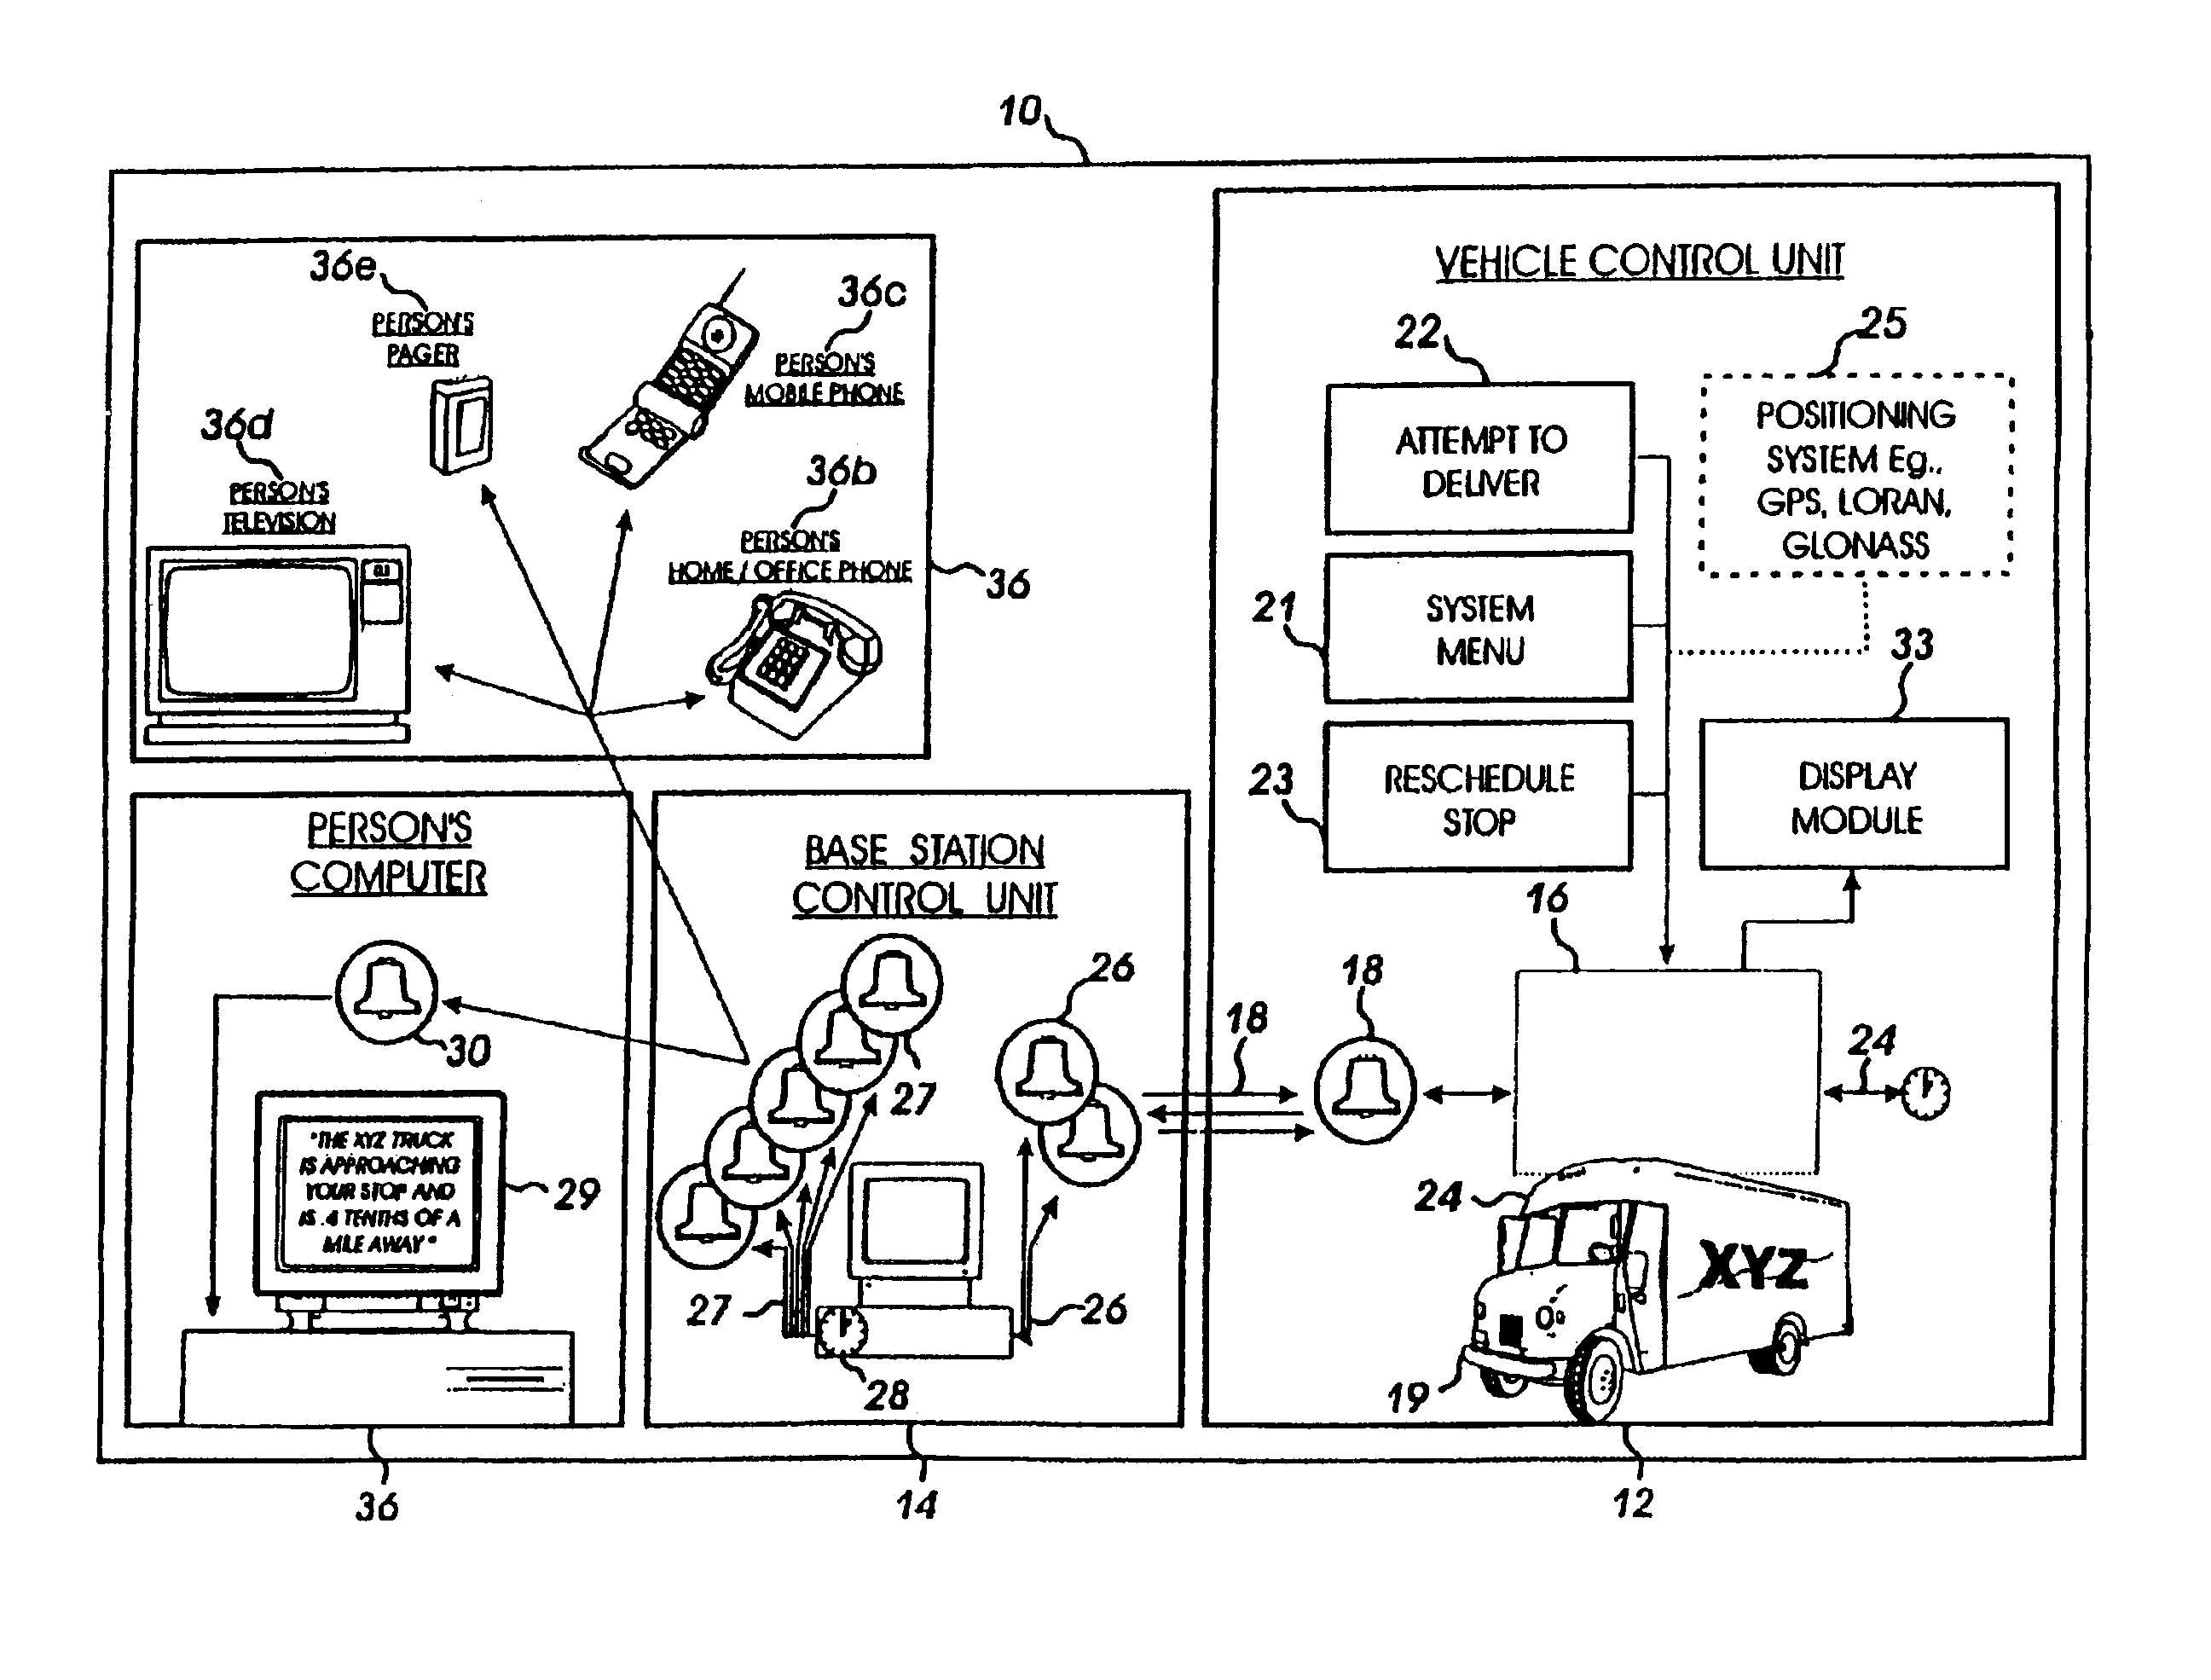 Notification systems and methods with user-definable notifications based upon occurance of events